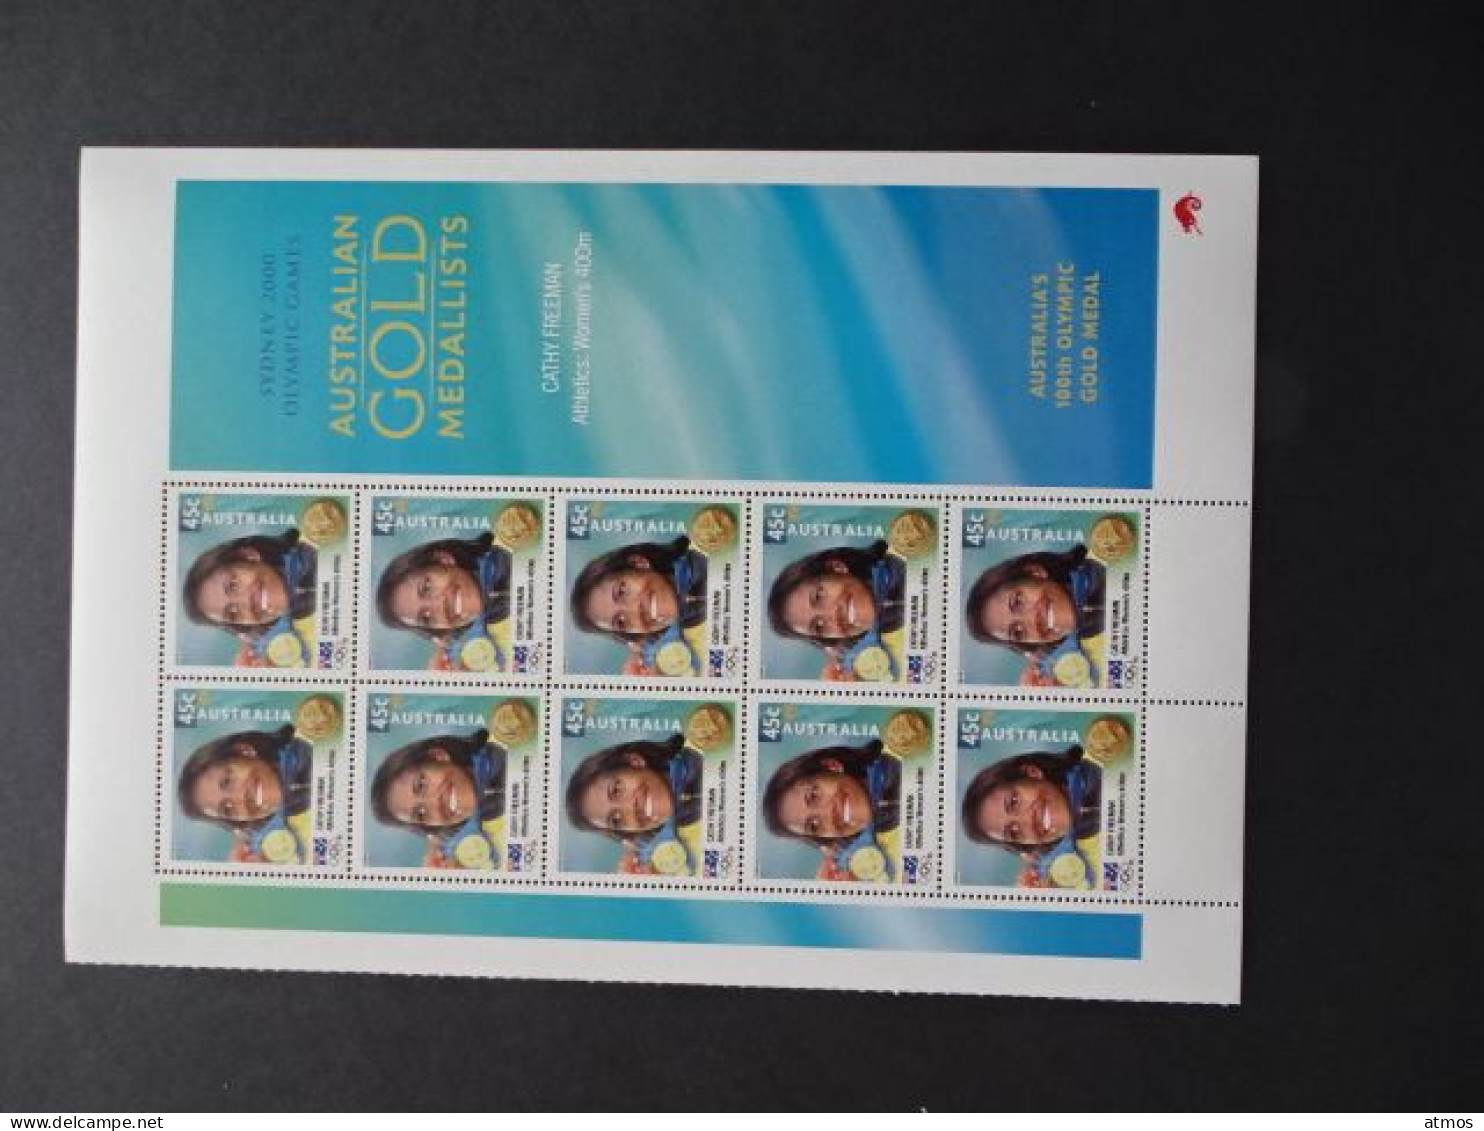 Australia MNH Michel Nr 1984 Sheet Of 10 From 2000 VIC - Mint Stamps